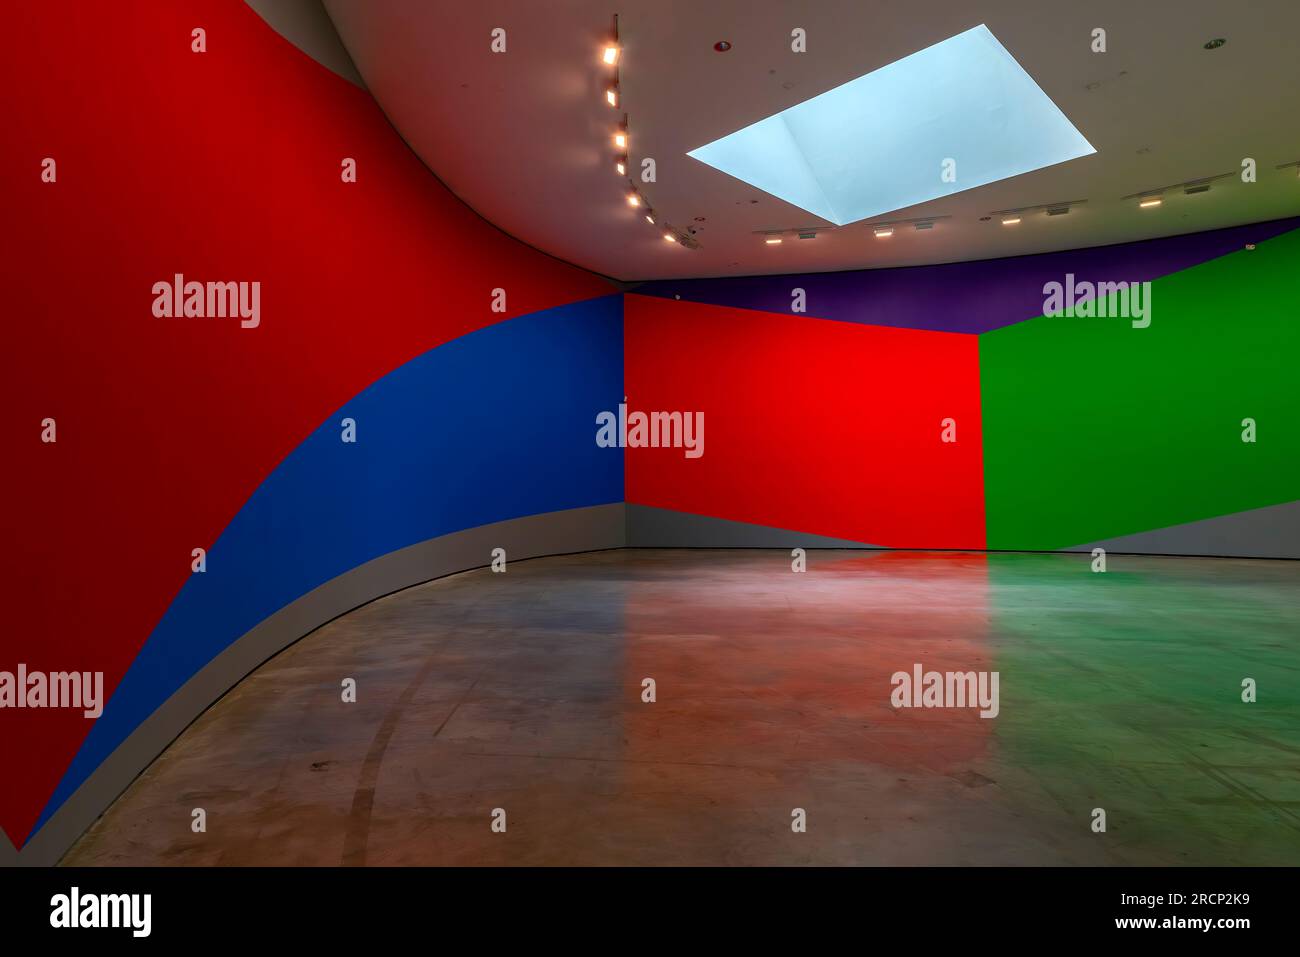 Exhibition by Sol Lewitt. The Guggenheim Museum Bilbao designed by architect Frank Gehry, and located in city of Bilbao, Basque Country, Spain. Stock Photo